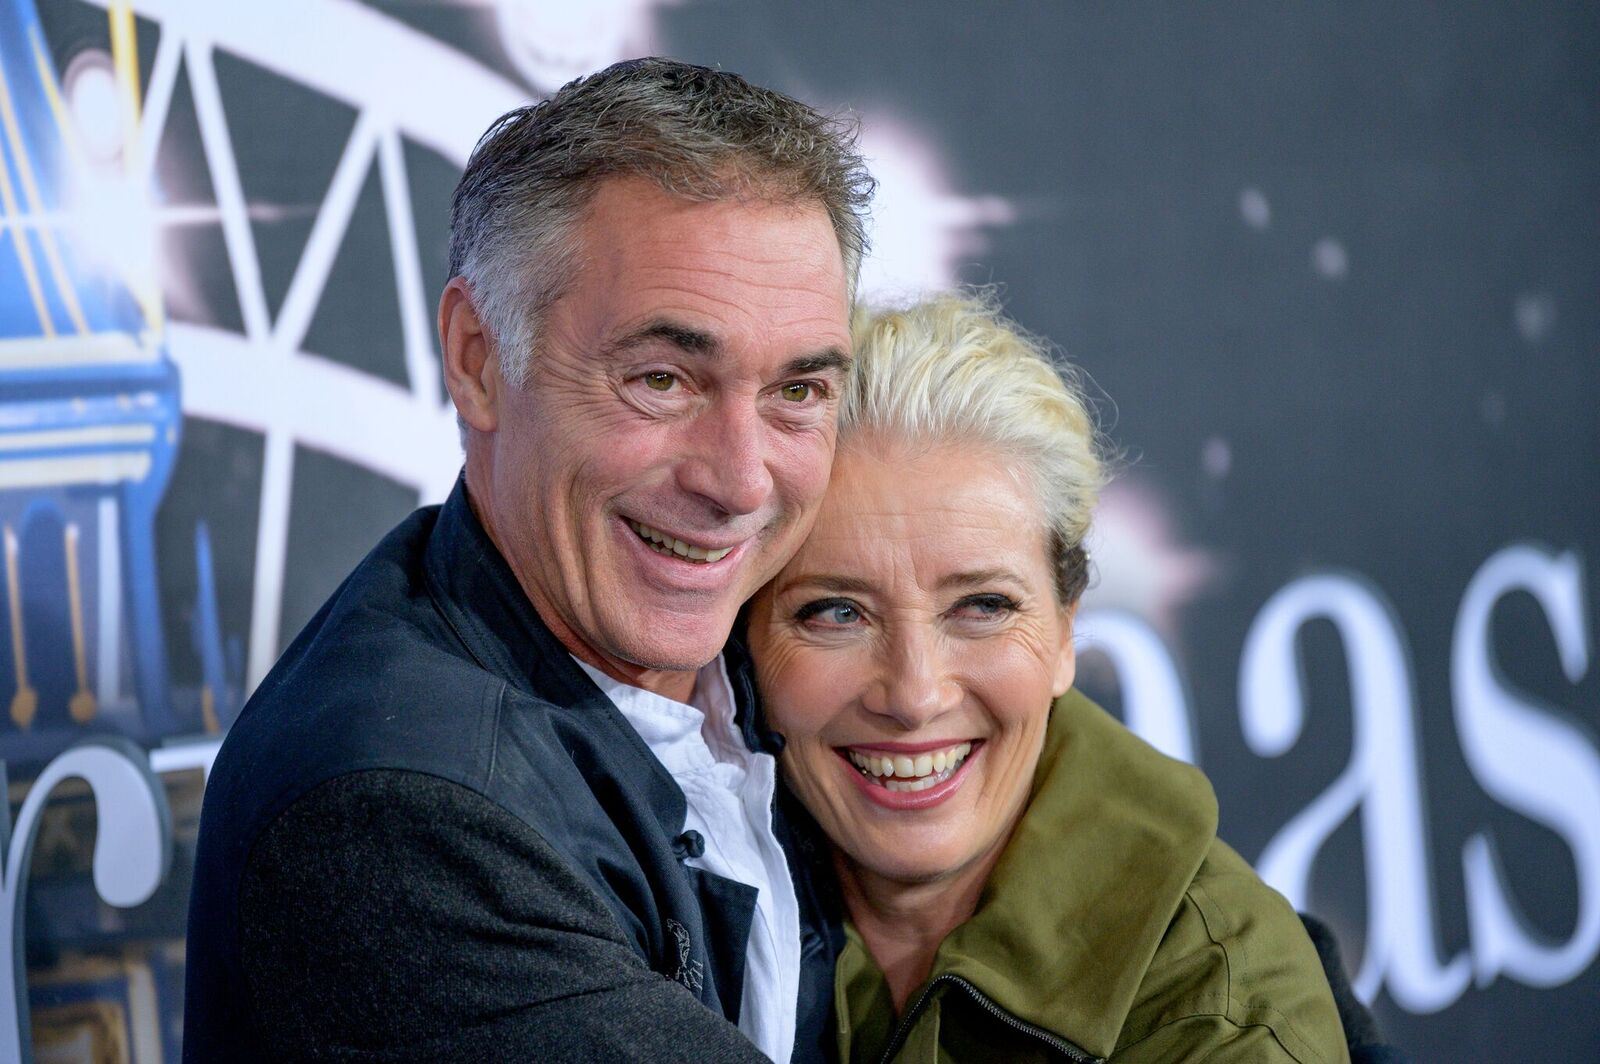 Greg Wise and Emma Thompson at the "Last Christmas" New York Premiere on October 29, 2019, in New York City | Photo: Getty Images